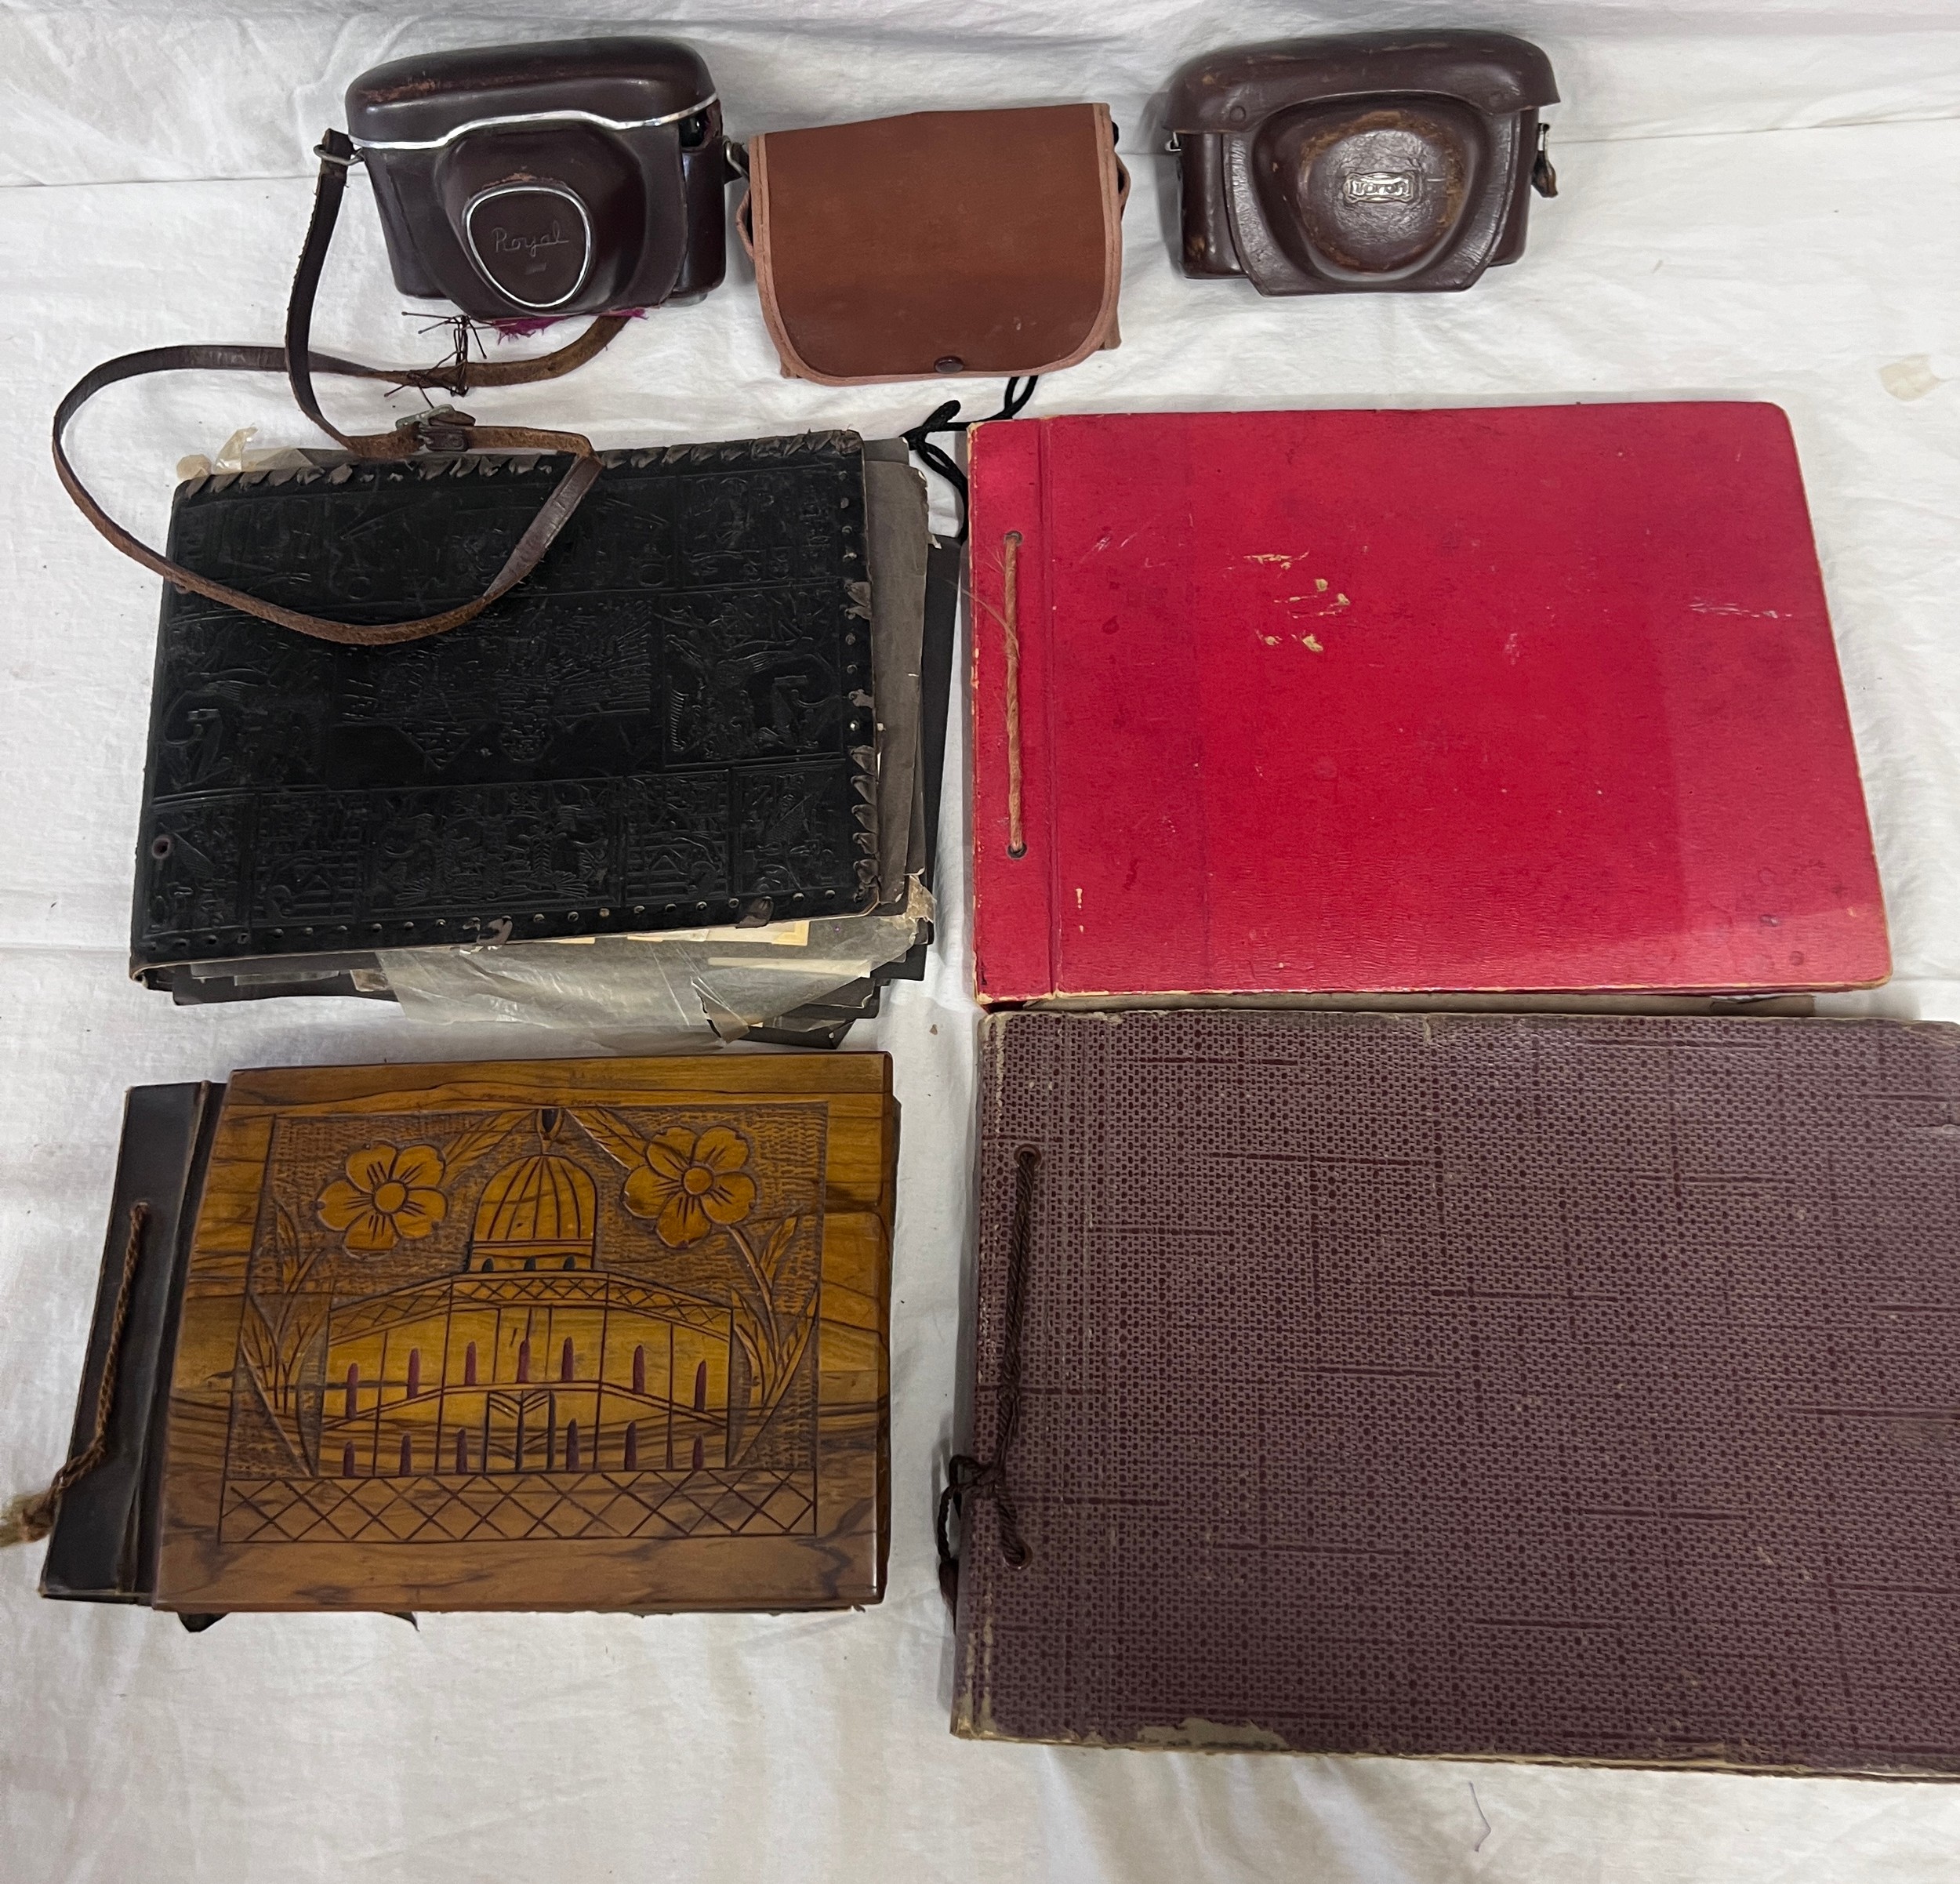 Harry Gilbert Shorters M. B. E., A.M.N. Four photograph & postcard albums and cameras pertaining